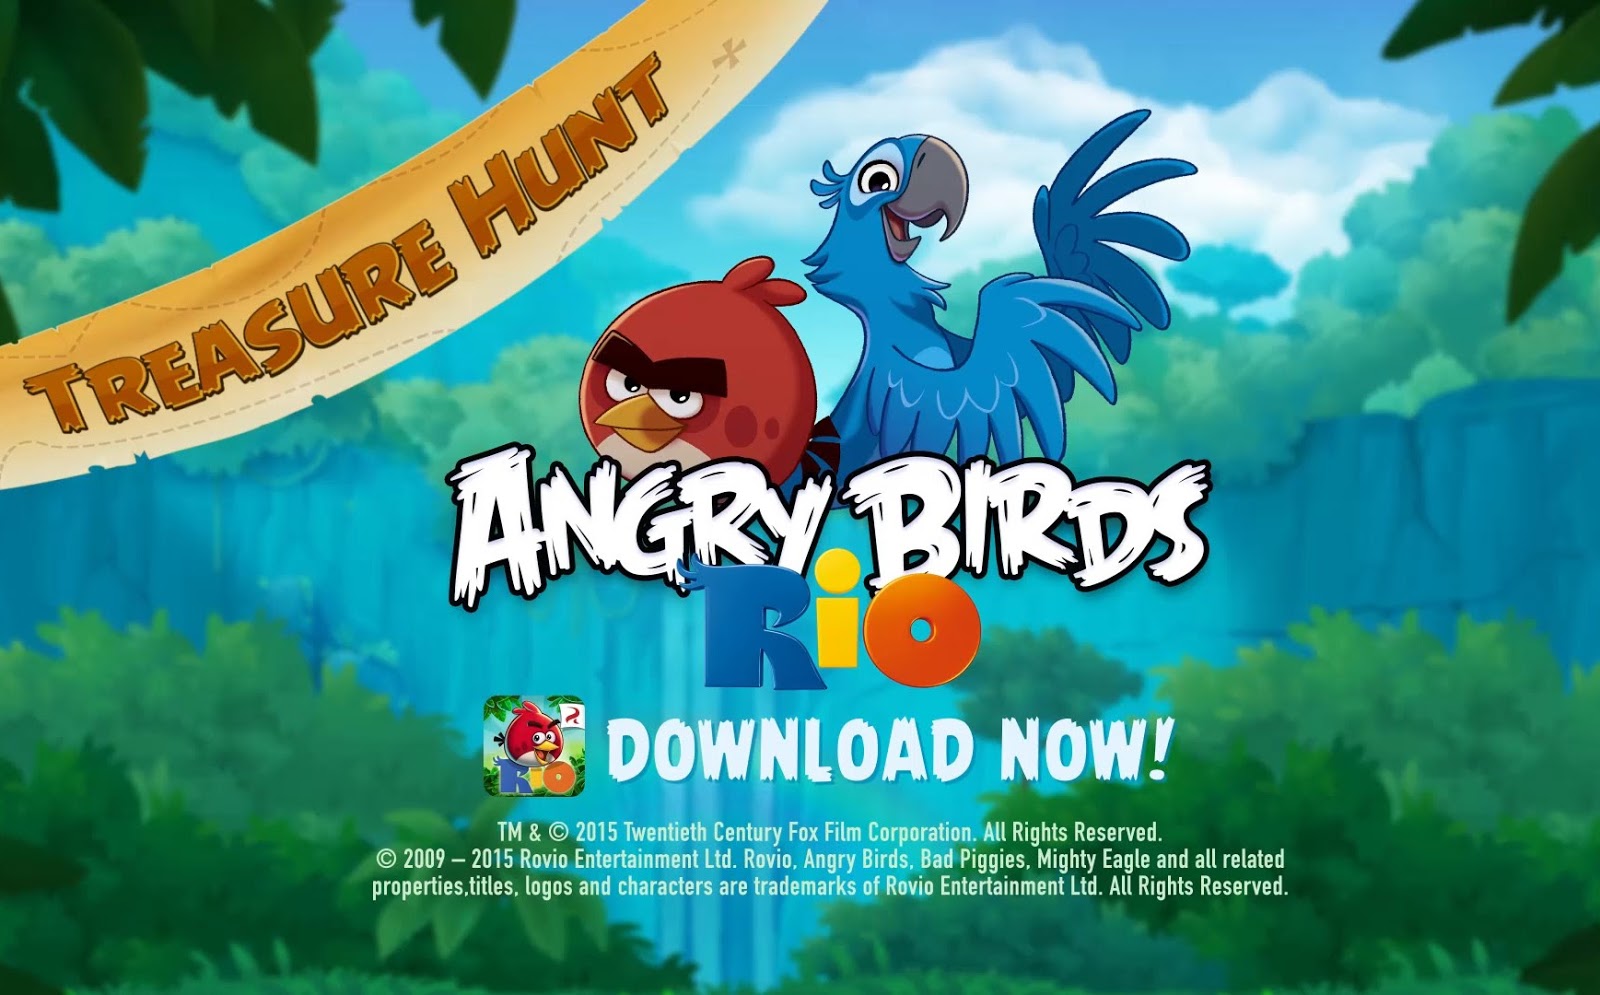 Angry birds rio full movie free download sites